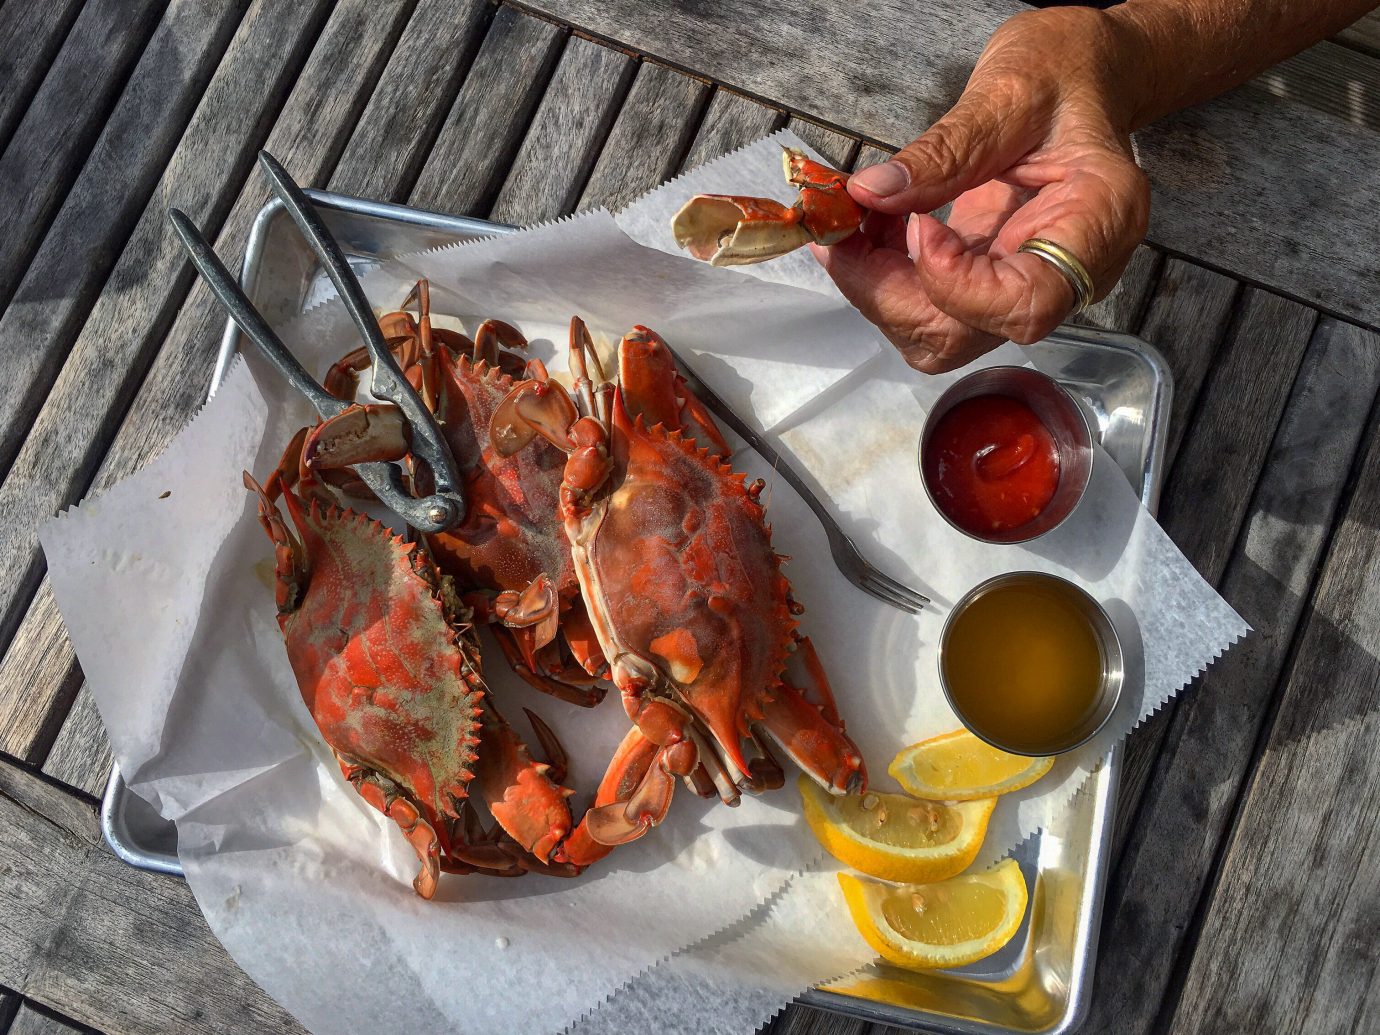 Girls Getaways Trip Ideas Weekend Getaways arthropod invertebrate animal person Seafood crab food outdoor dungeness crab decapoda animal source foods crustacean seafood boil lobster crab boil dish king crab crab meat recipe lobster thermidor soft shell crab meat meal